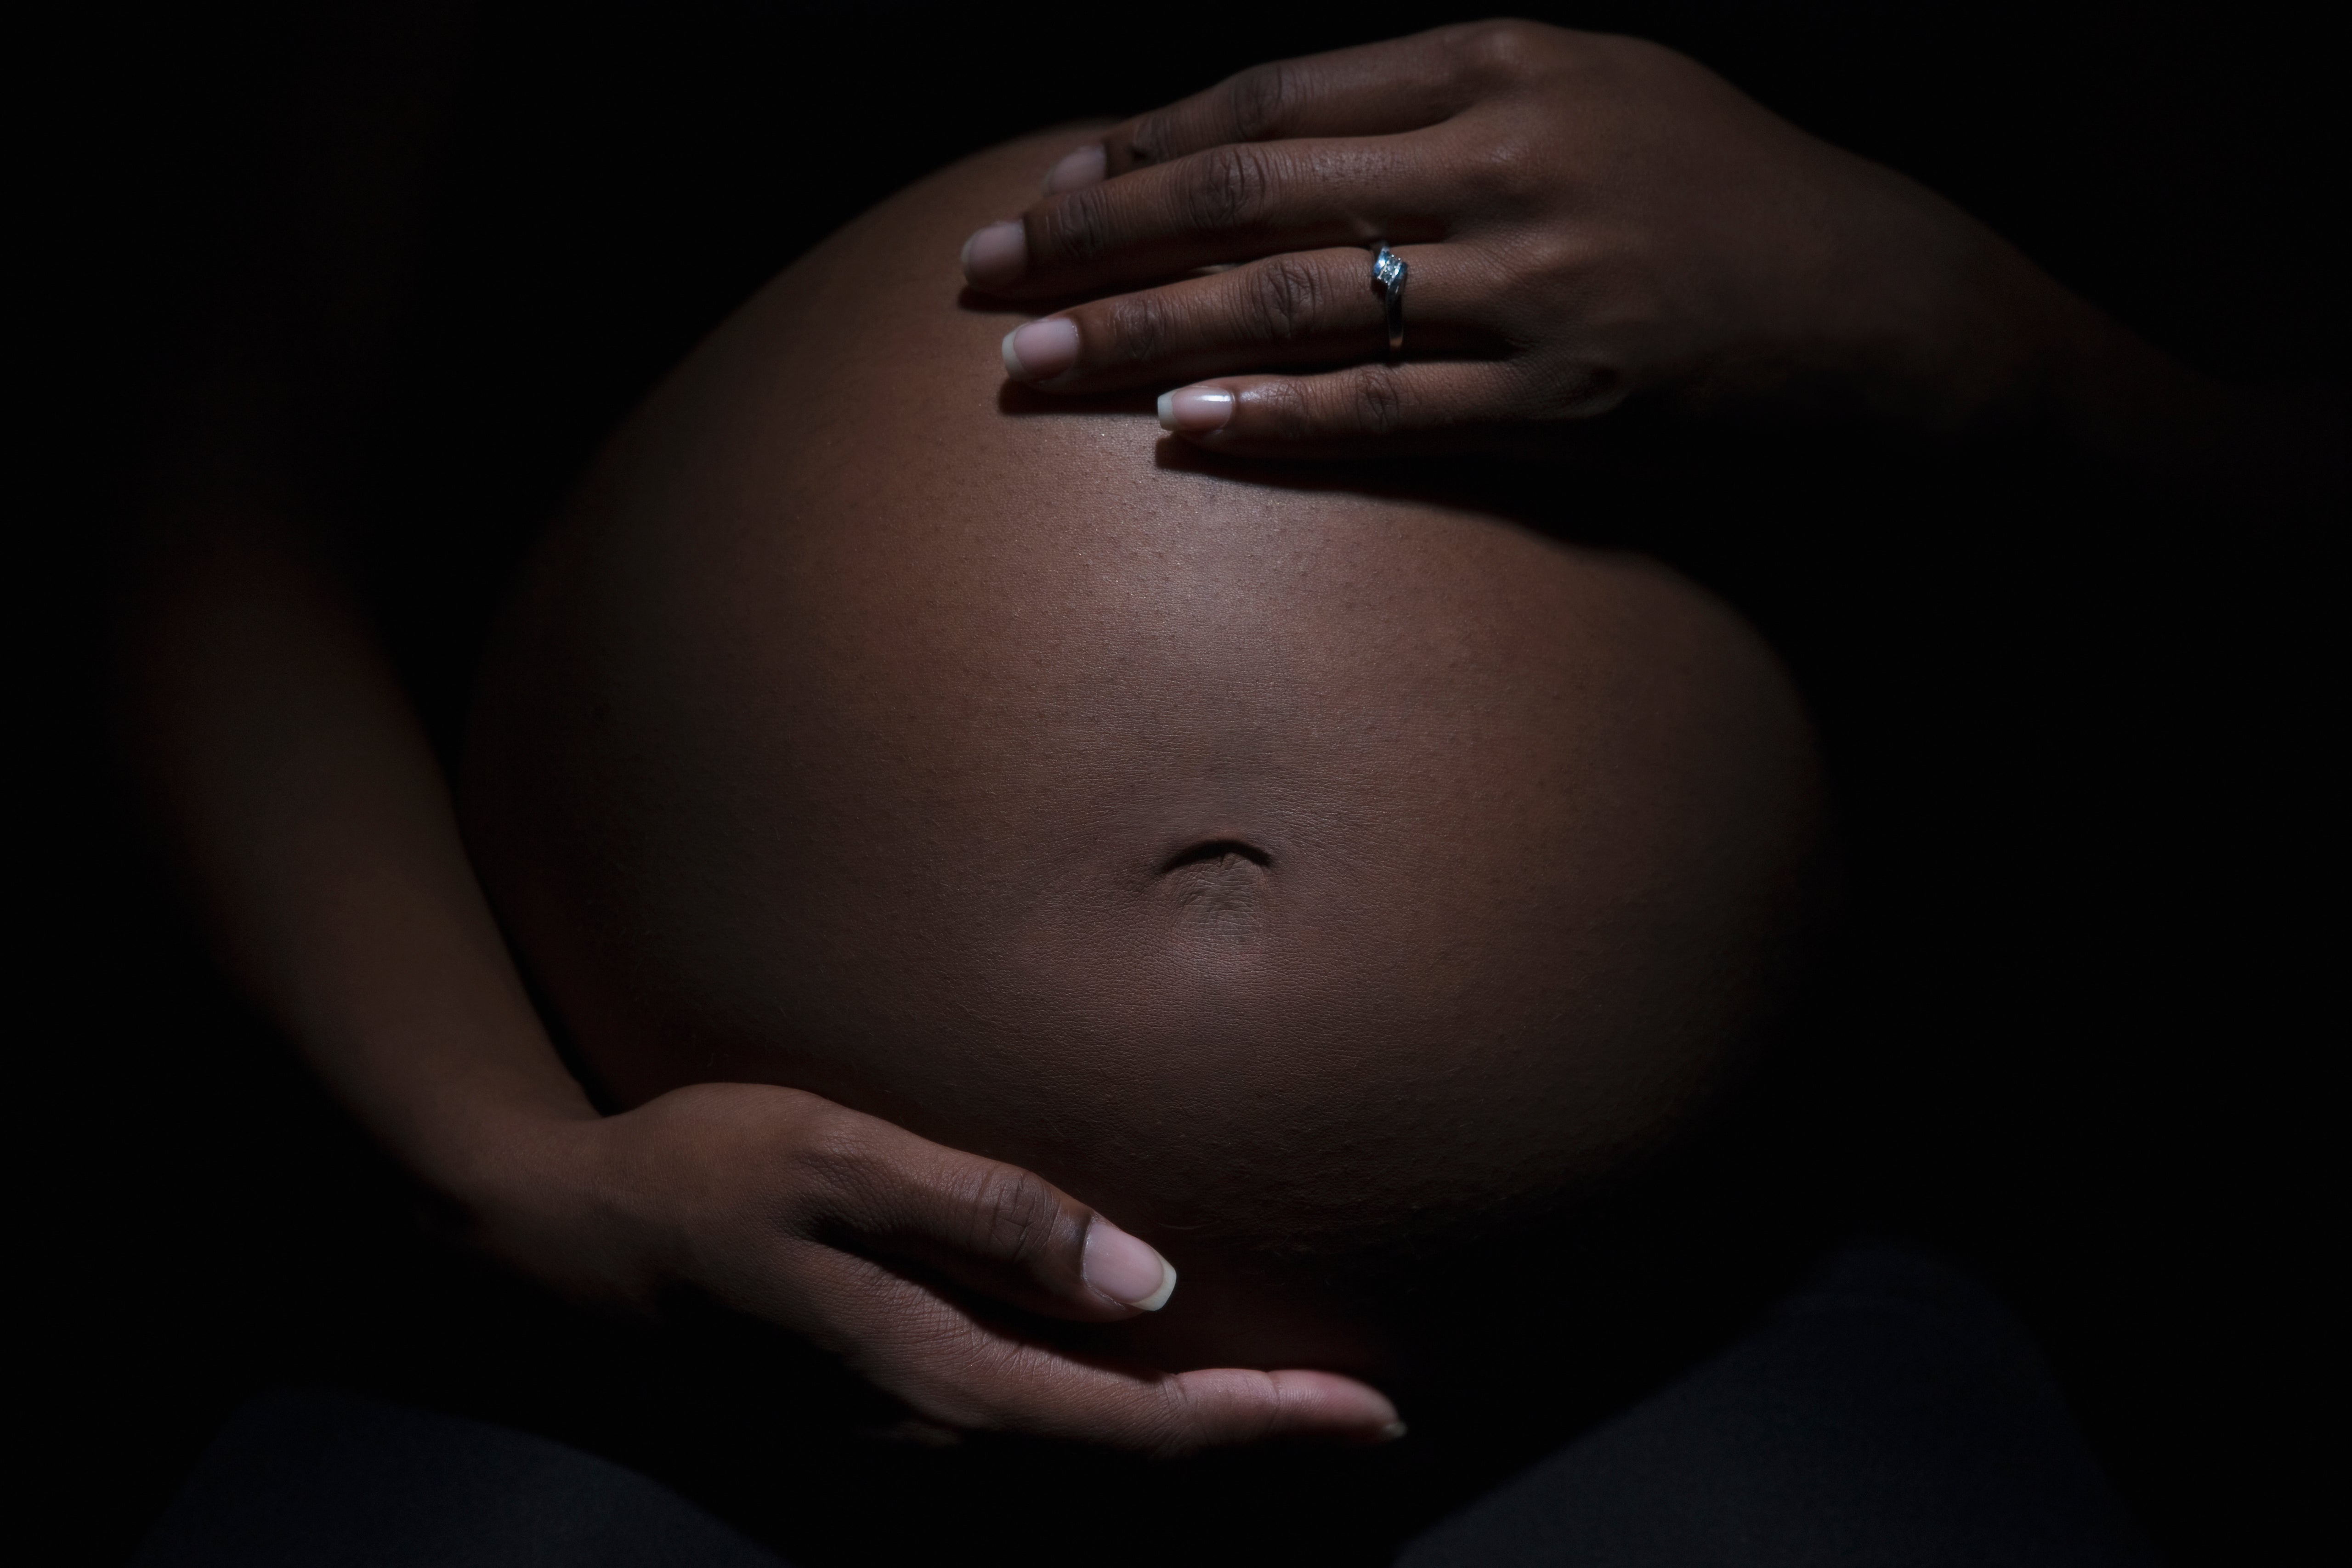 Black Mothers In NYC Are 12 Times More Likely To Die In Childbirth Than White Women